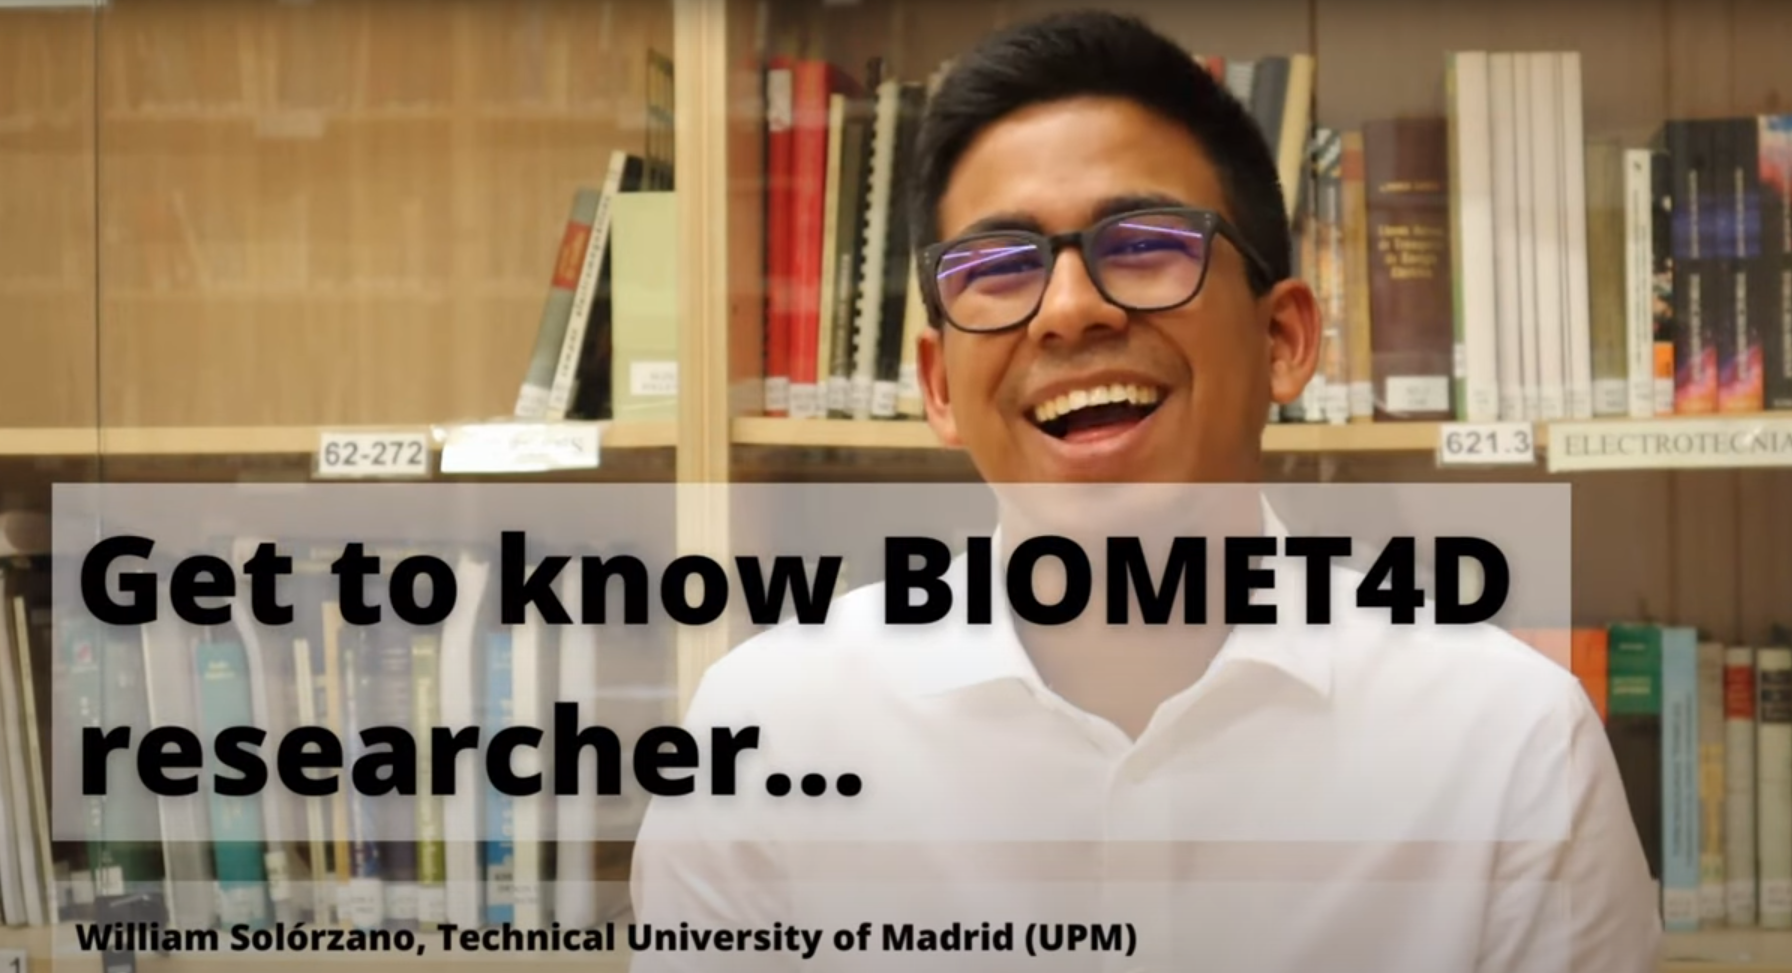 Get to know BIOMET4D researcher with William Solórzano 